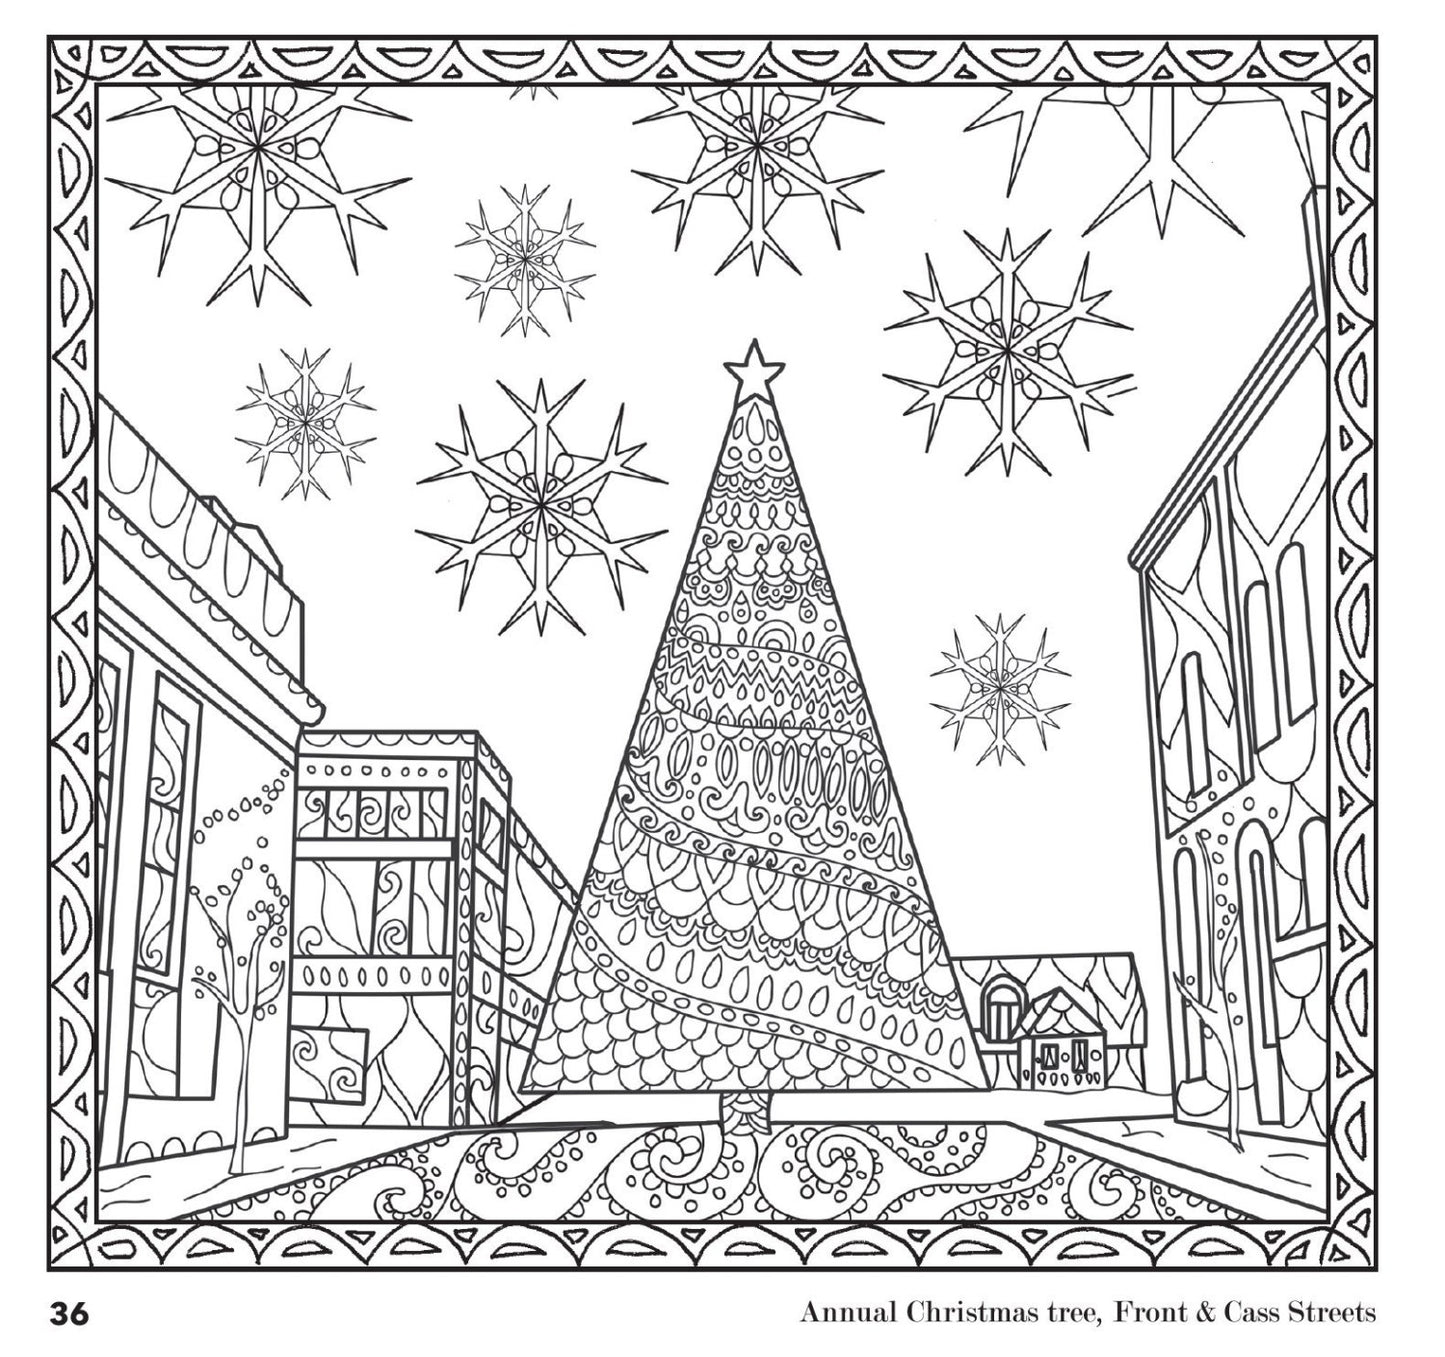 Etchings: The Traverse City Coloring Book for Grown-Ups